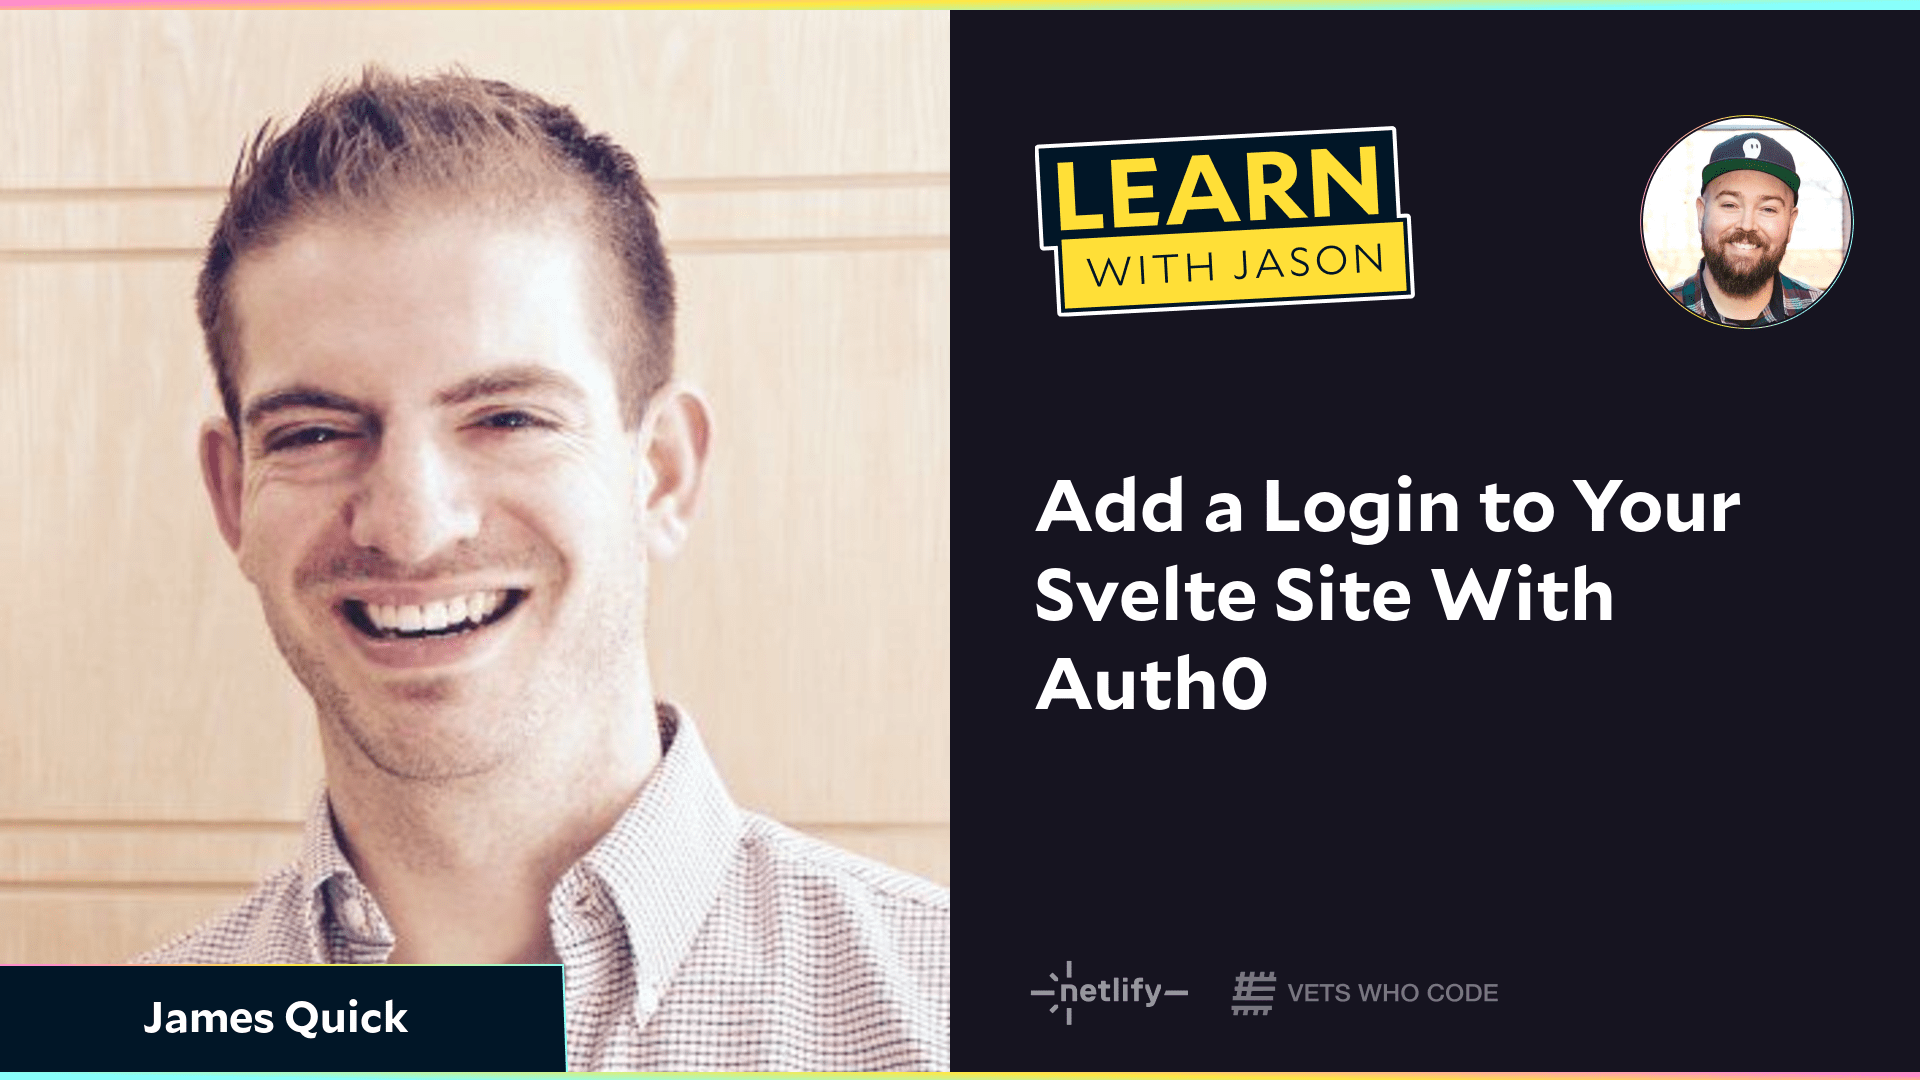 Add a Login to Your Svelte Site With Auth0 (with James Quick)